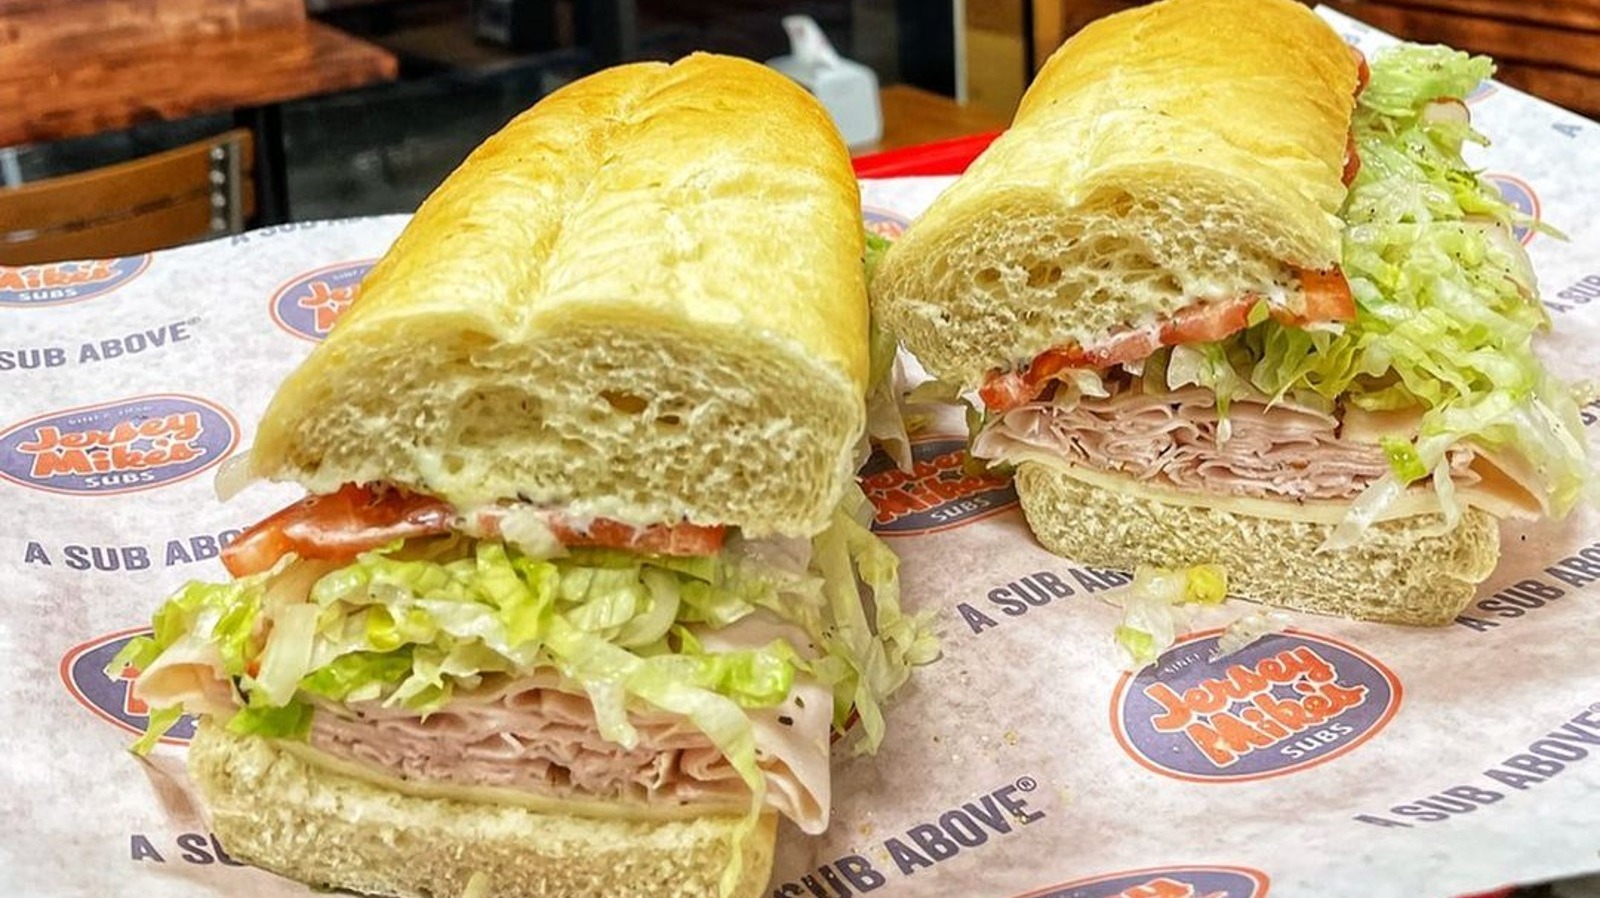 Consumers Beware: 10 Sketchy Aspects of Jersey Mike’s Menu Revealed